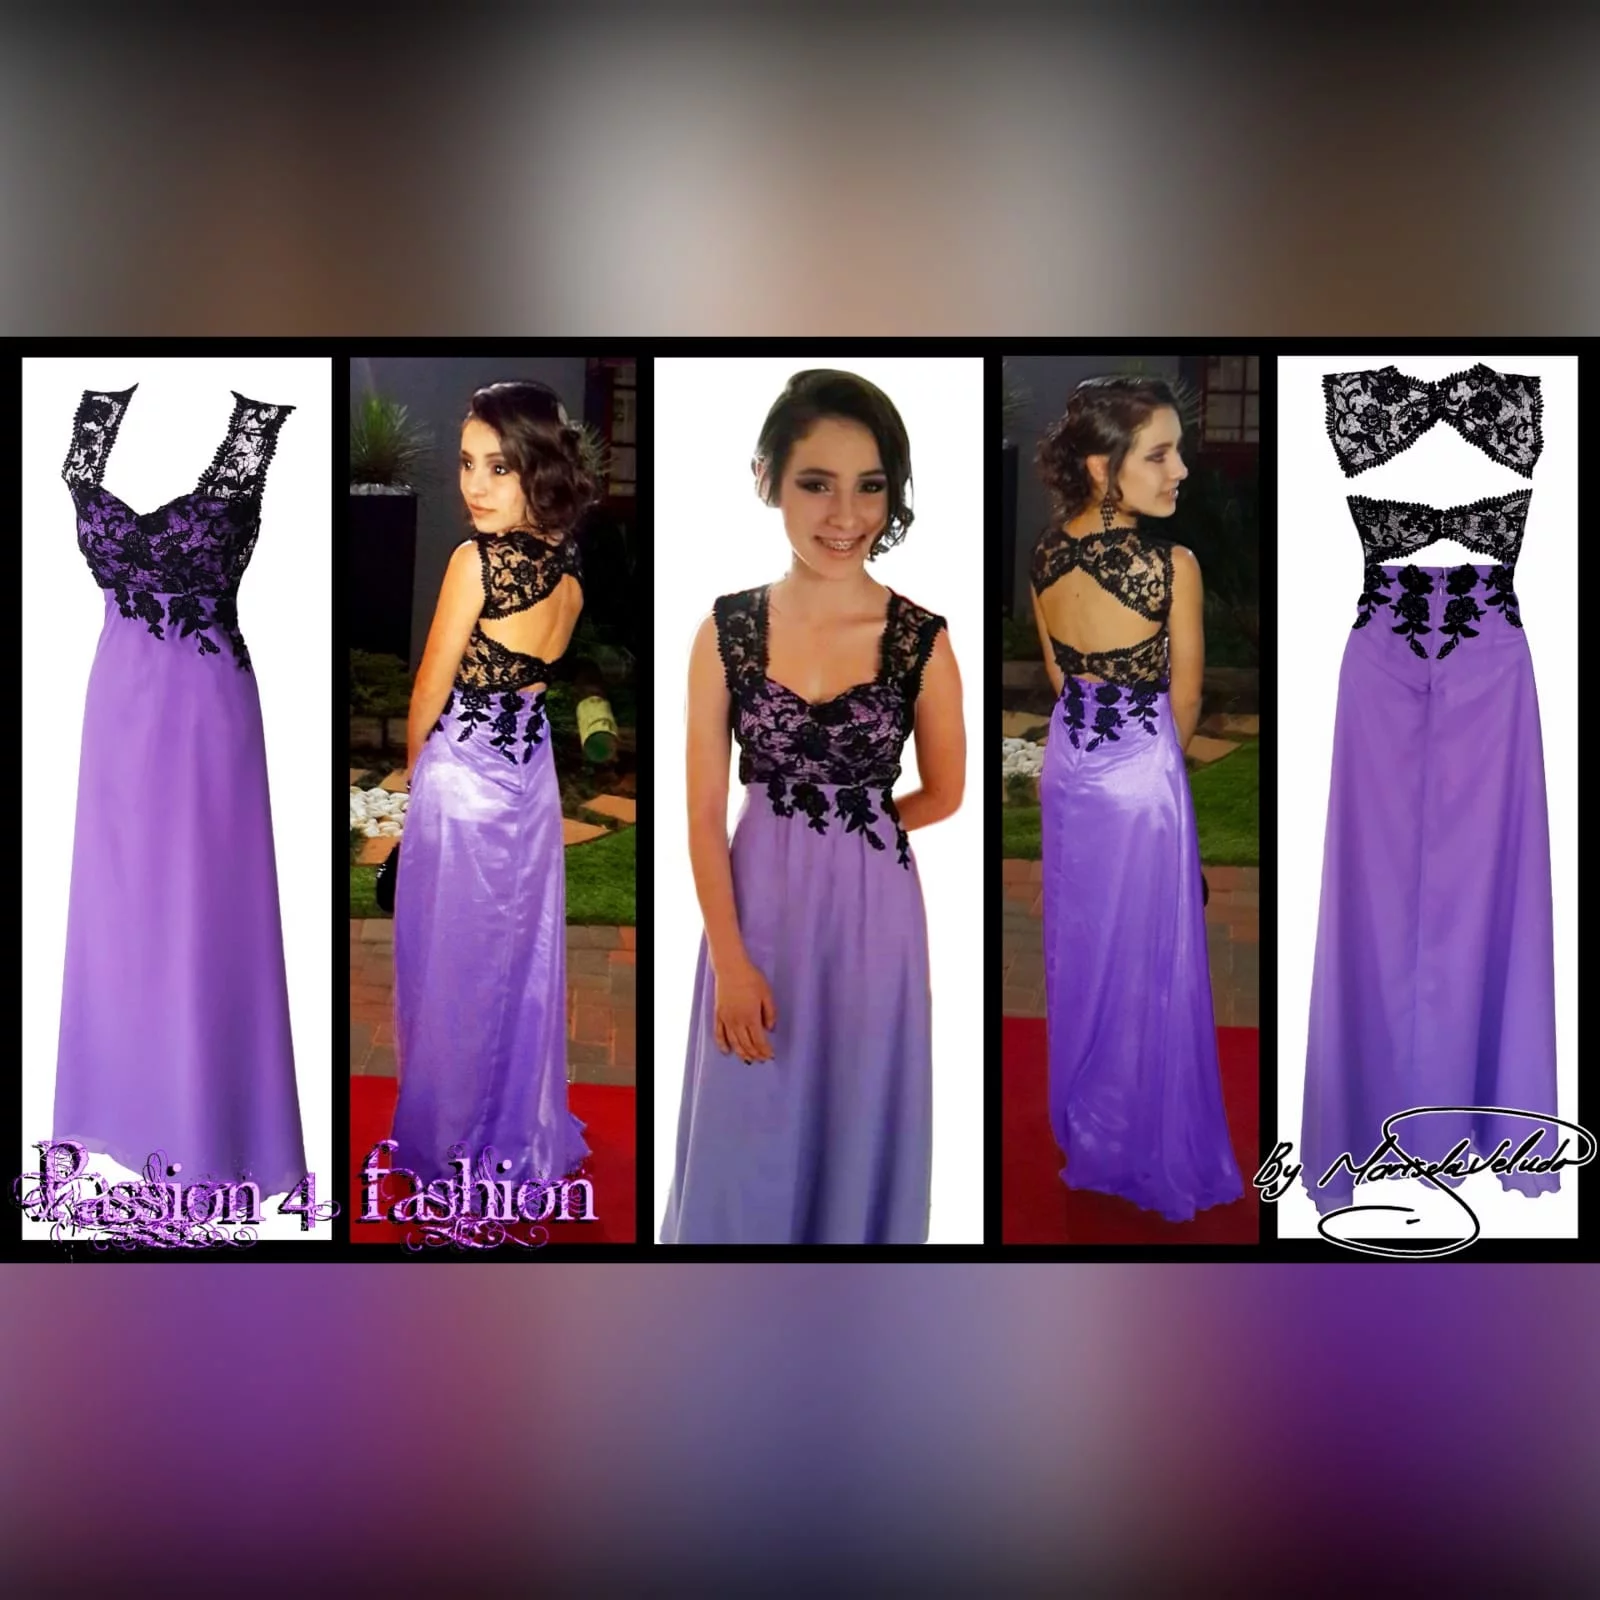 Lilac and black lace matric farewell dress 4 lilac and black lace matric farewell dress. Bodice with applique lace and a sweetheart neckline. With sheer lace shoulder straps and sheer lace on the back. Long and flowy matric farewell dress.